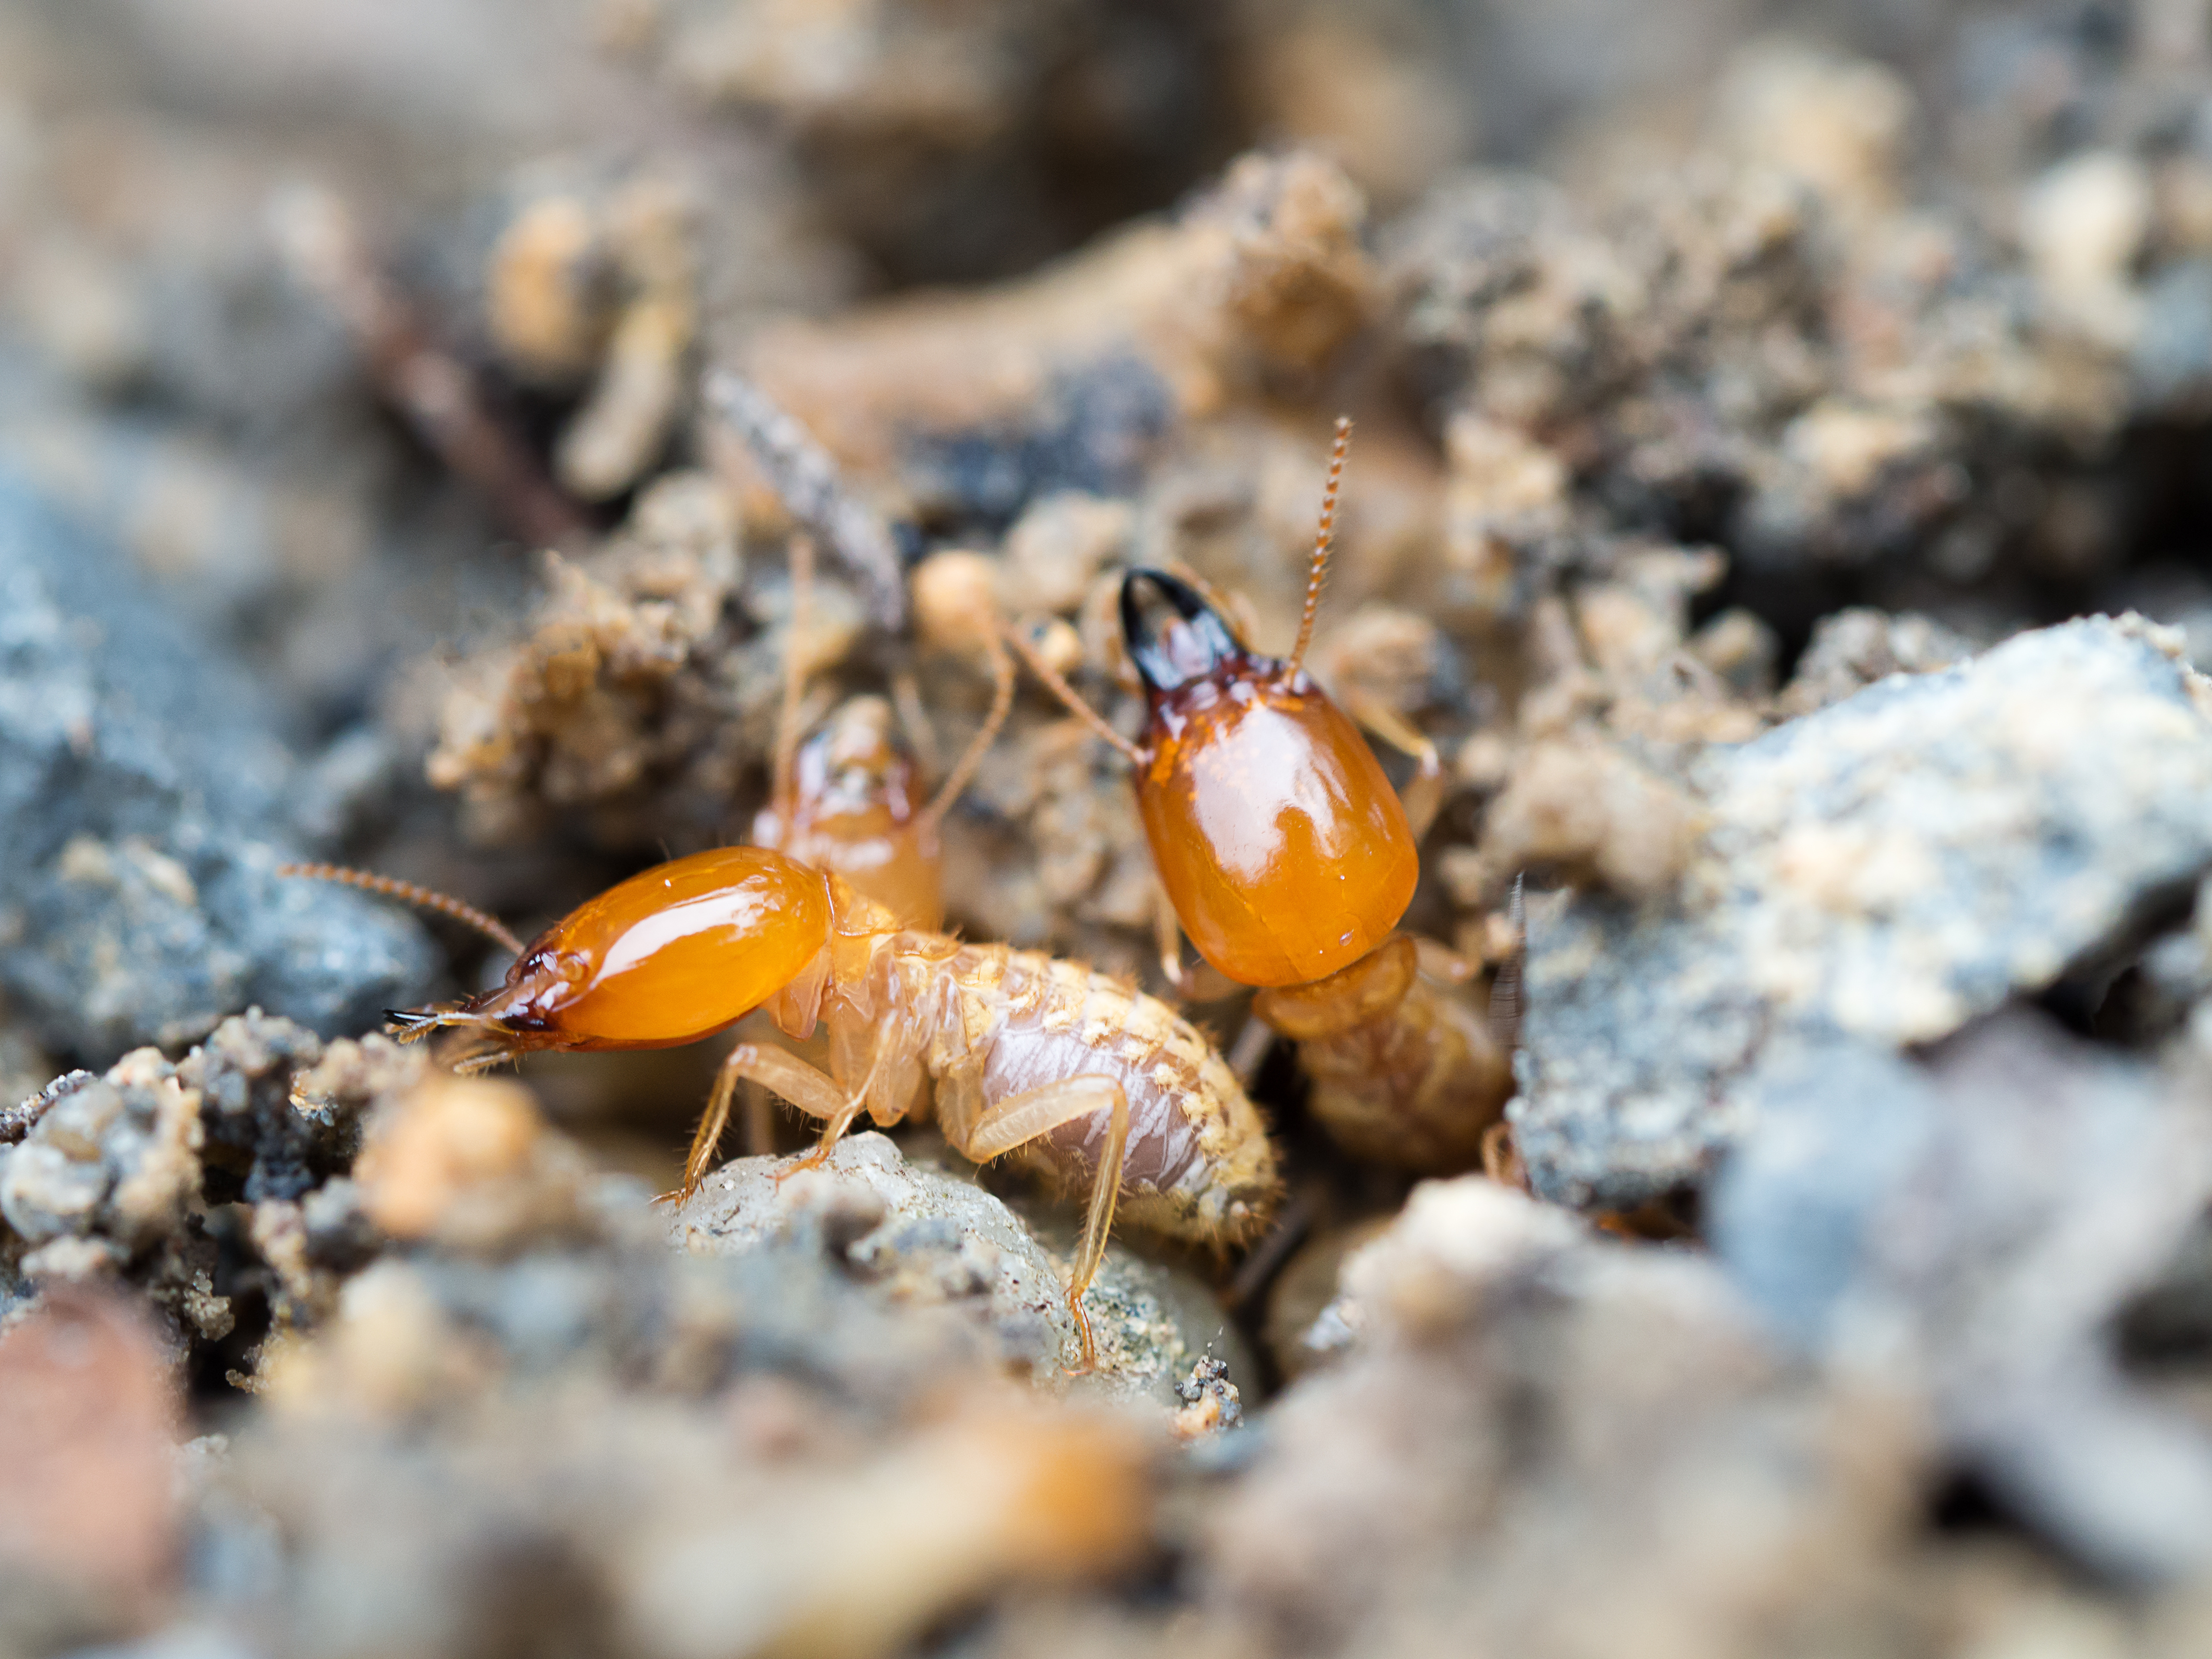 Formosan termites - contact GGA Pest Management today for termite removal!